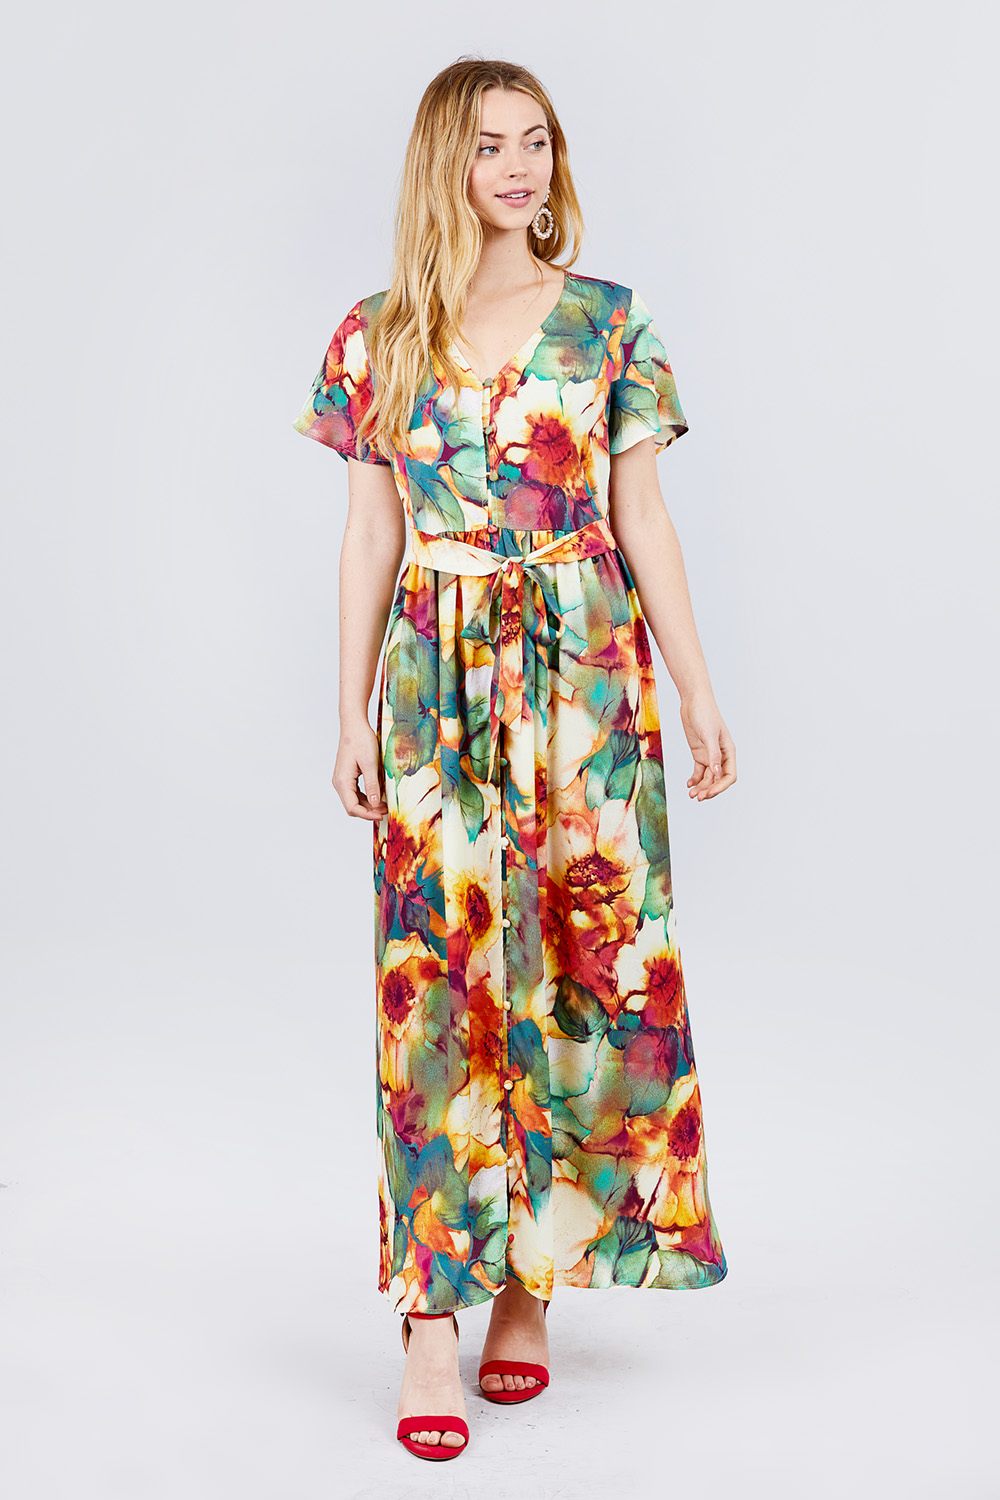 Casual Clubwear 100% Polyester Short Sleeve V-neck Button Down Sash Tie Belted Floral Print Woven Maxi Dress (Rust Green)